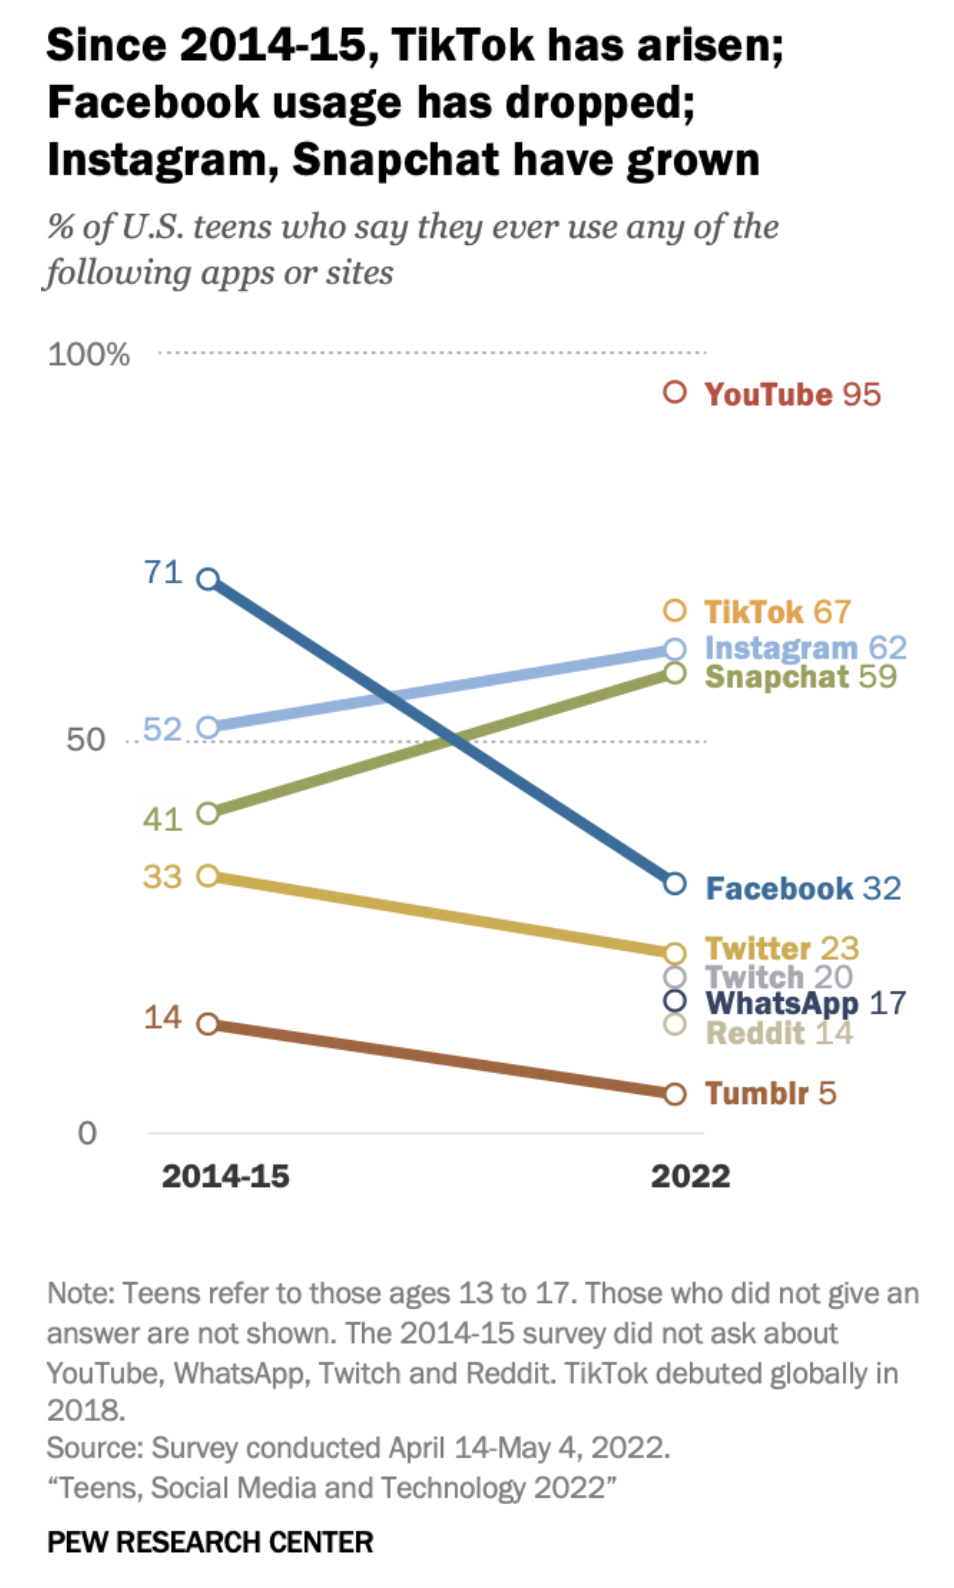 U.S. teens have abandoned Facebook, Pew study says